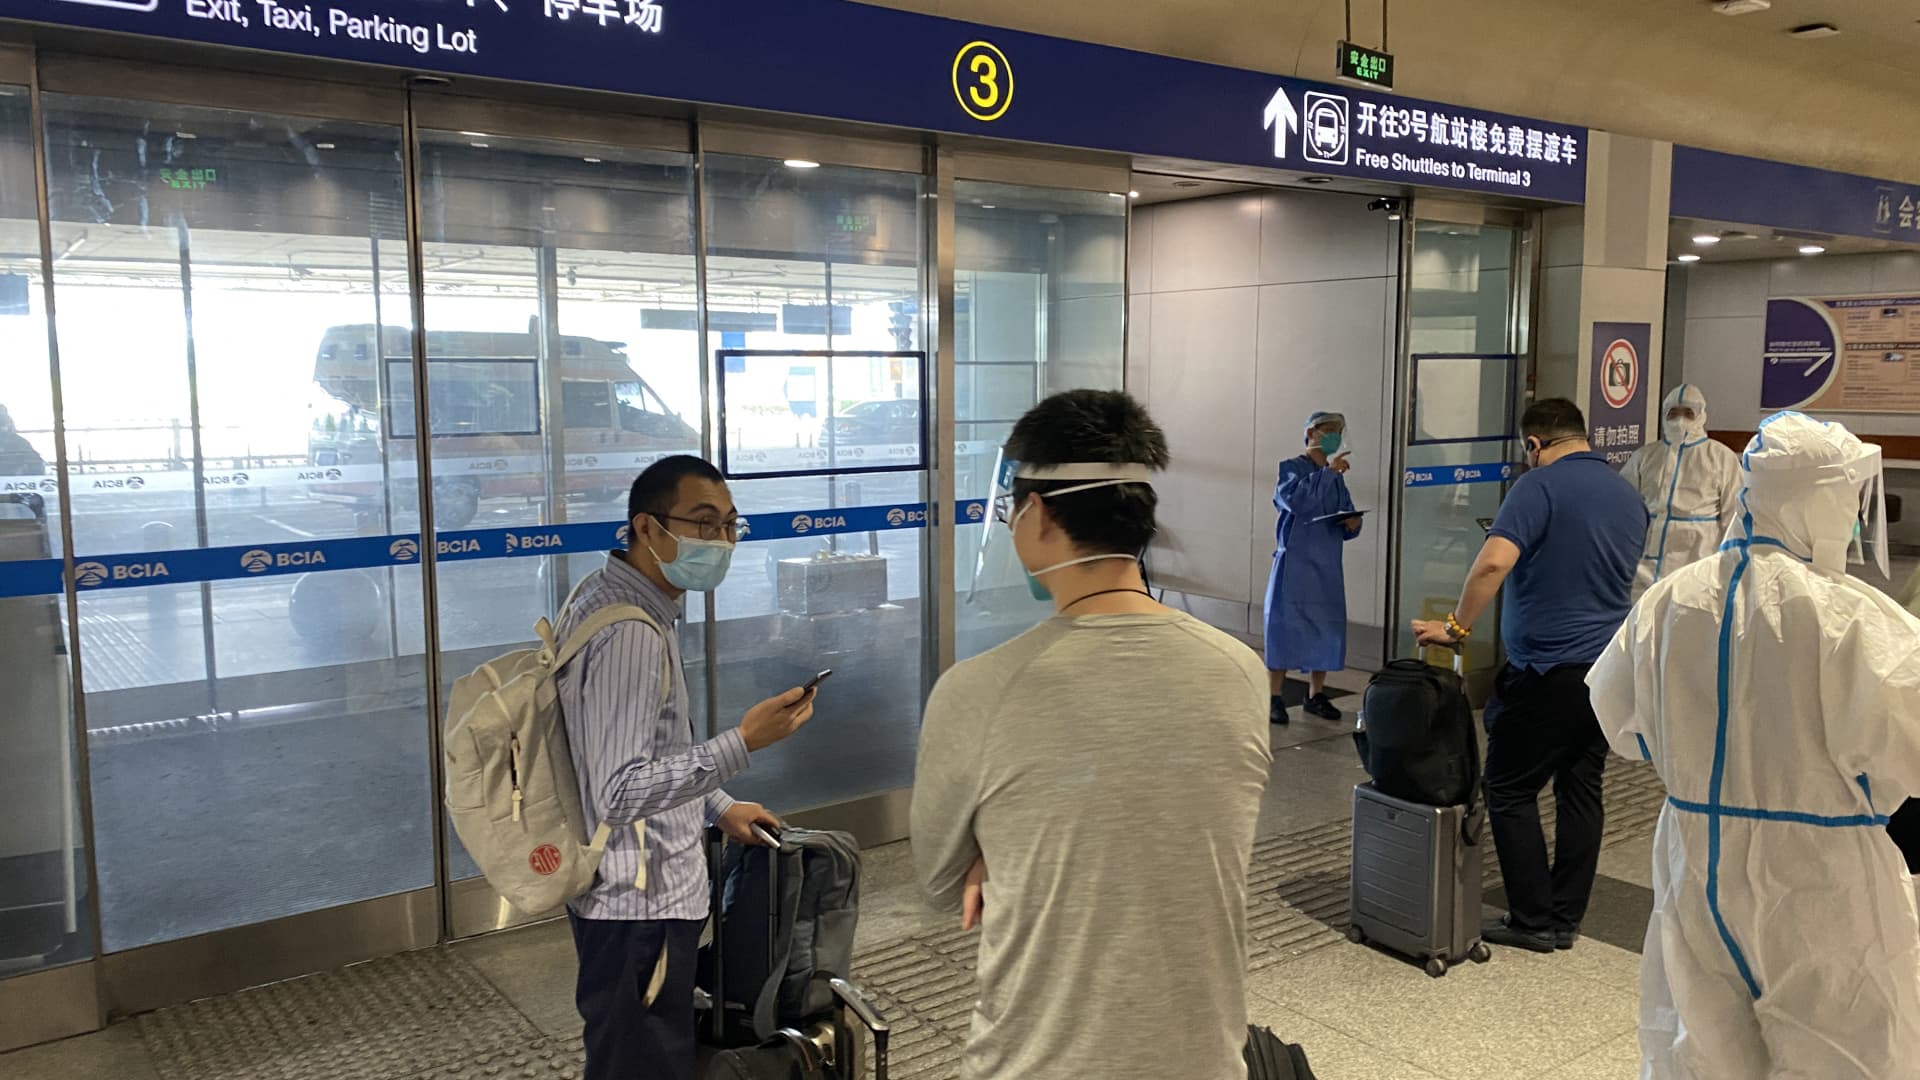 For more than two years, overseas travelers have had to quarantine upon arrival in China because of Covid restrictions. Pictured here at Beijing International Airport on June 18, 2022, are passengers waiting to be taken to quarantine-designated destinations.